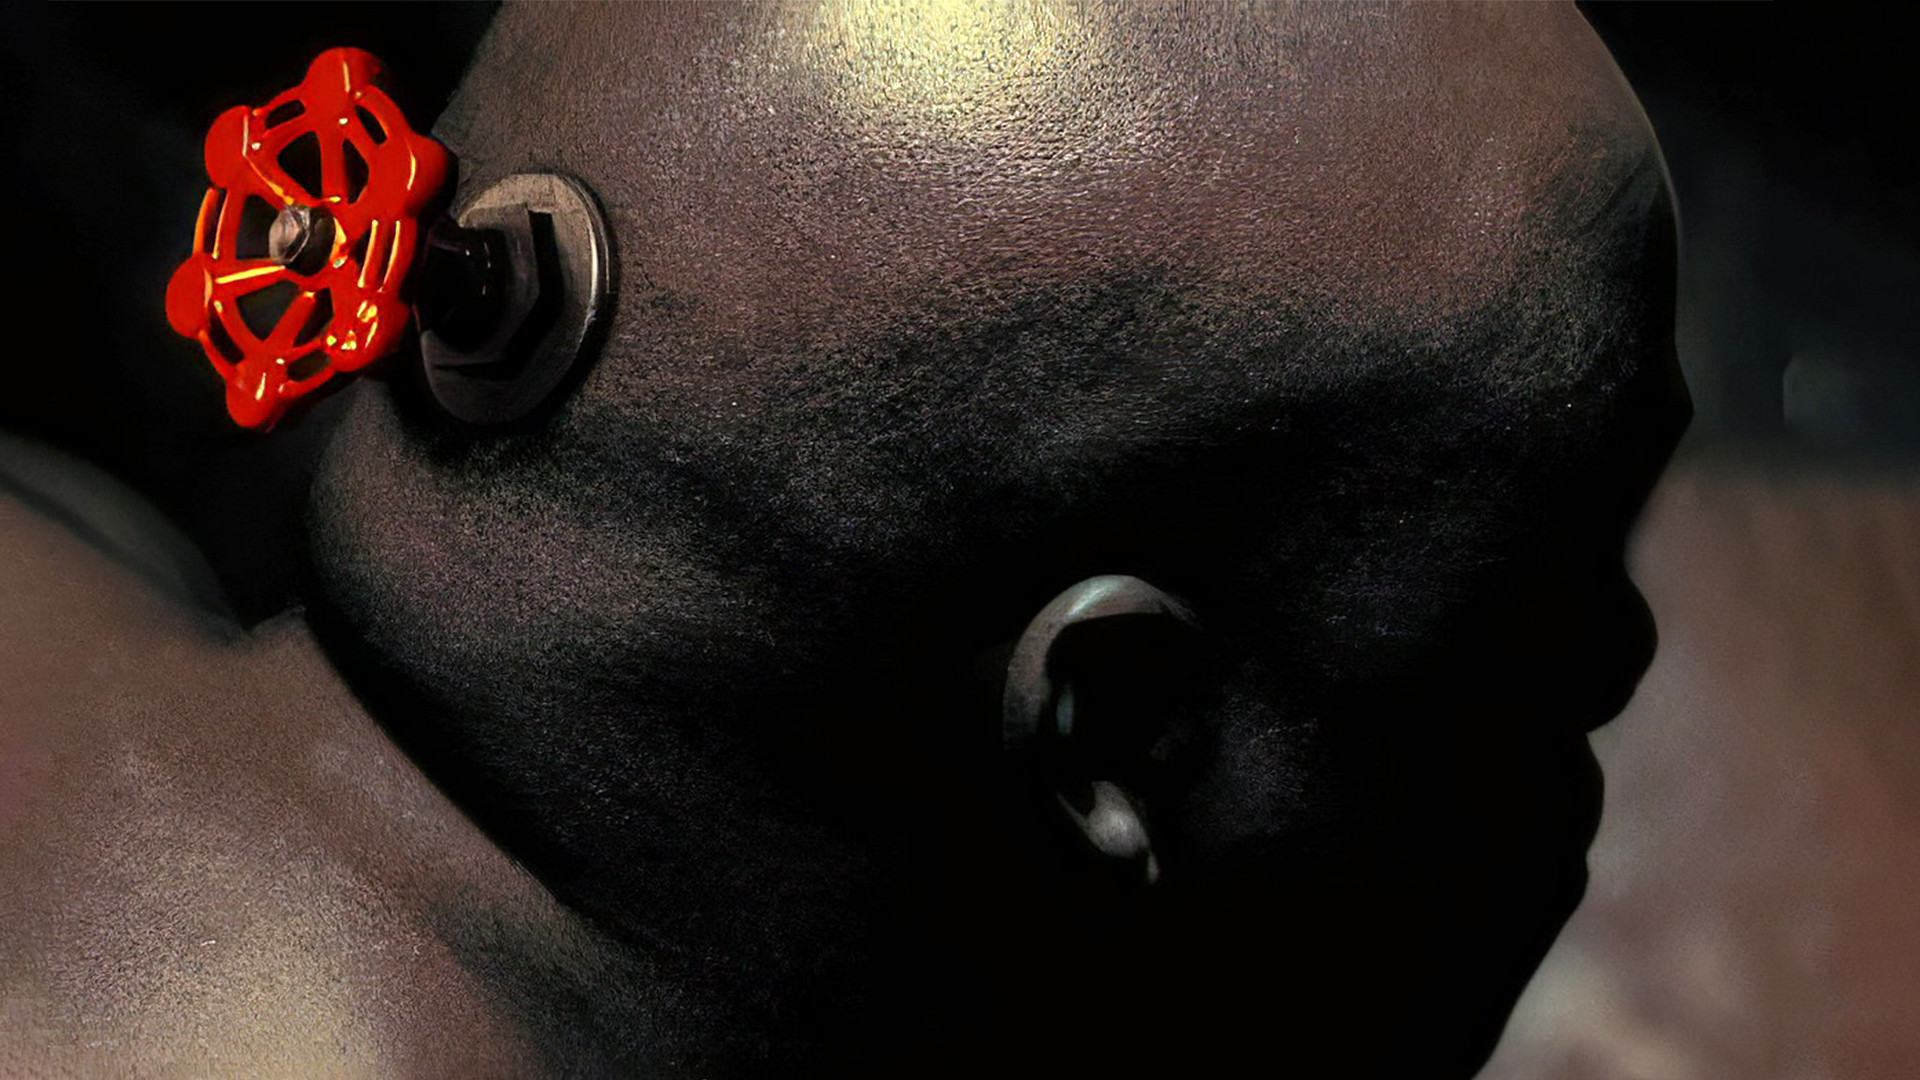 A photo of a bald man with a spigot valve attached to his head, an image used in Valve’s logo loading screens